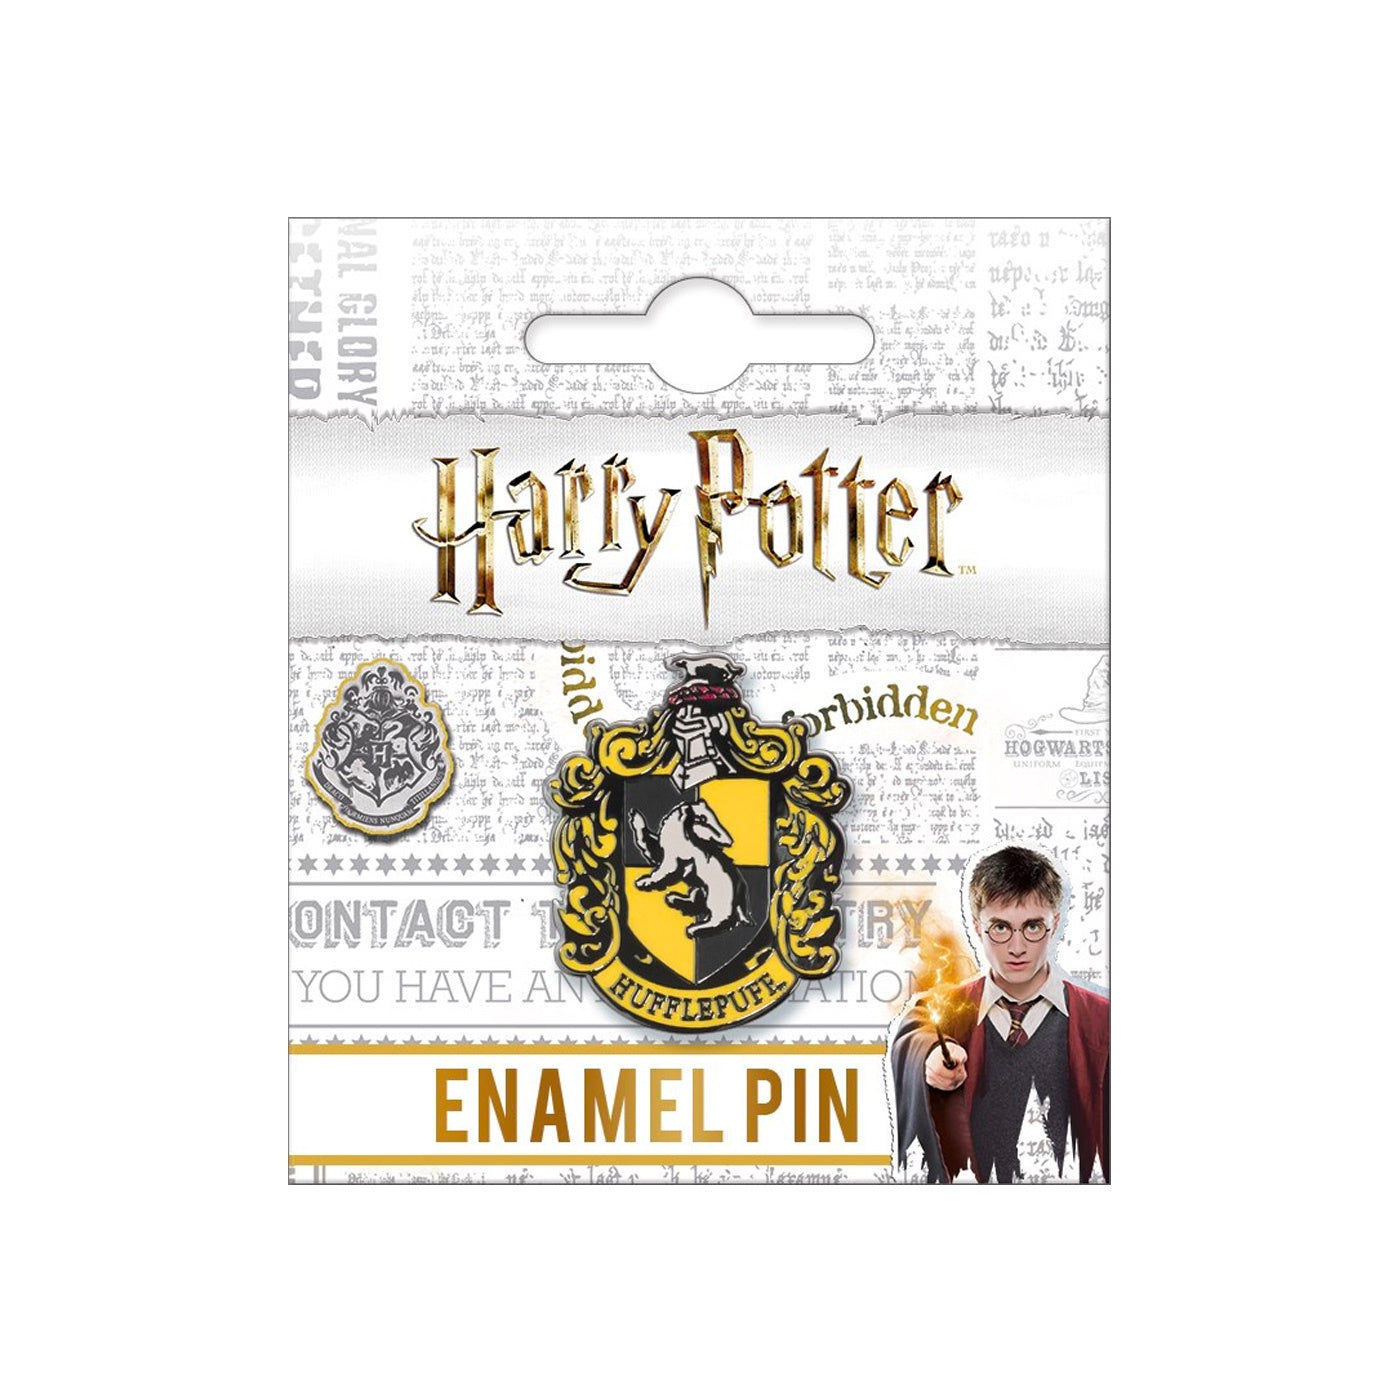 Dumbledore's Objects - the Latest Enamel Pins from Harry Potter